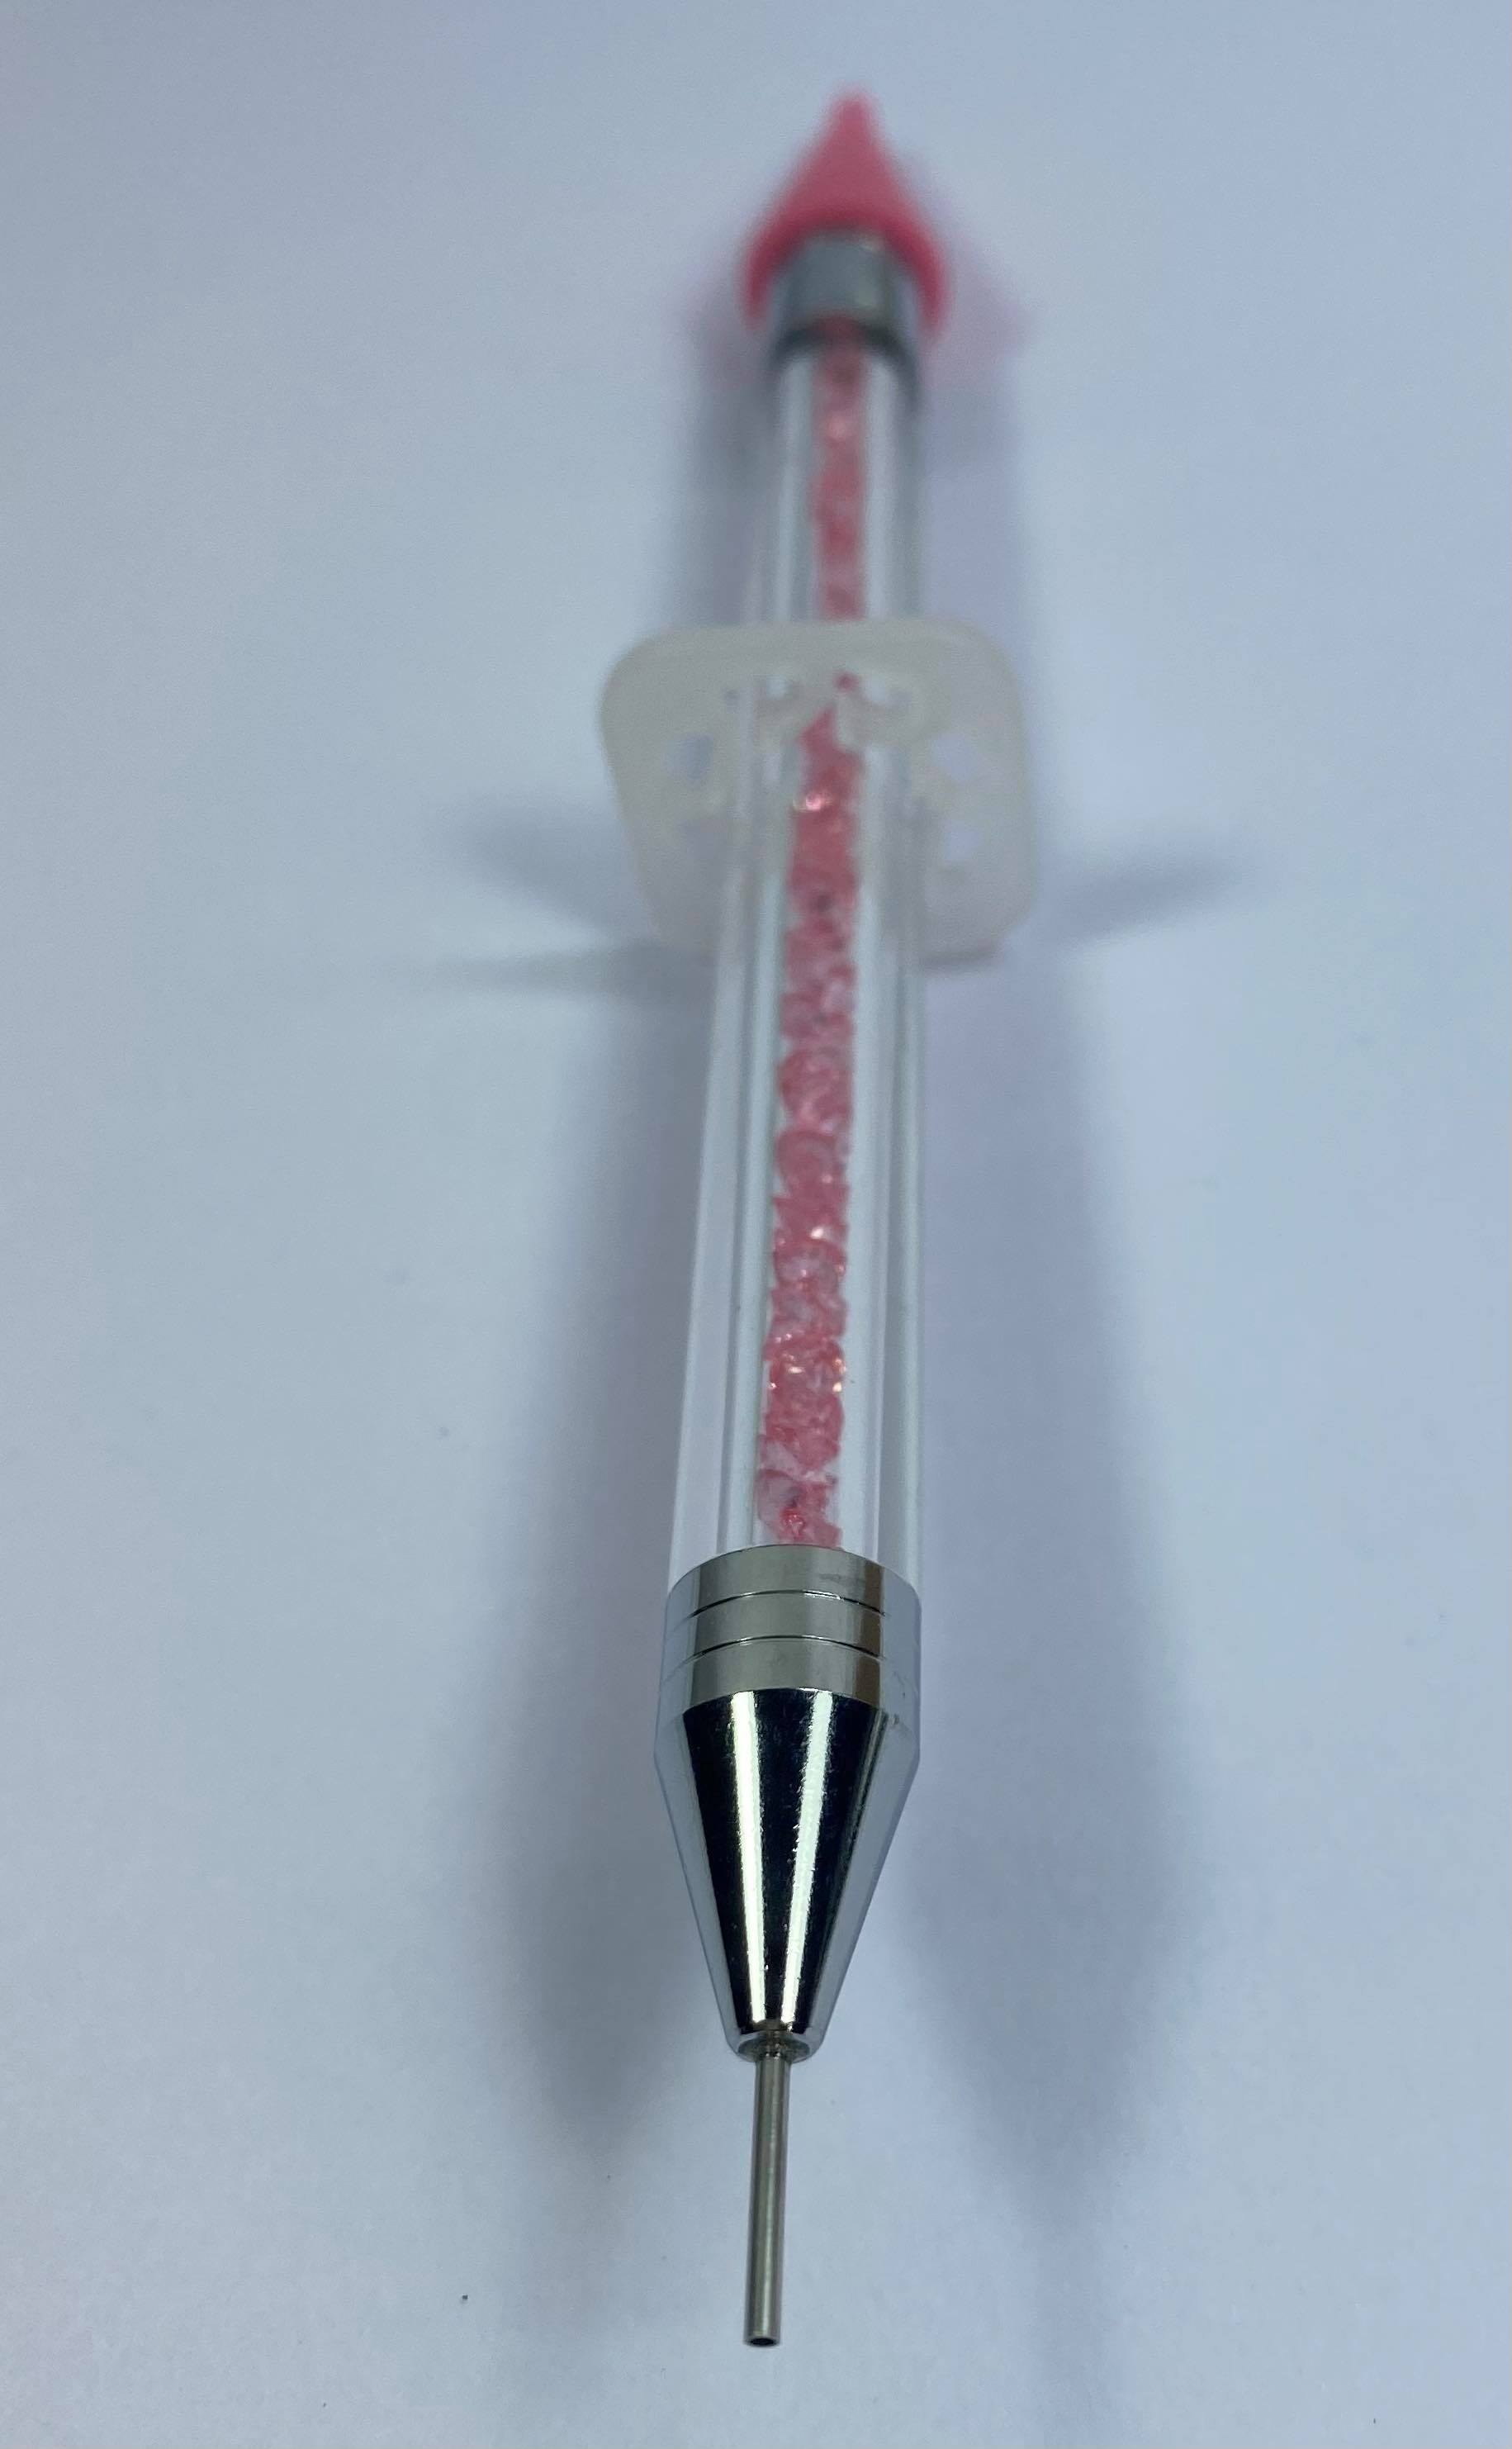 Dotting Pen With Wax Tip